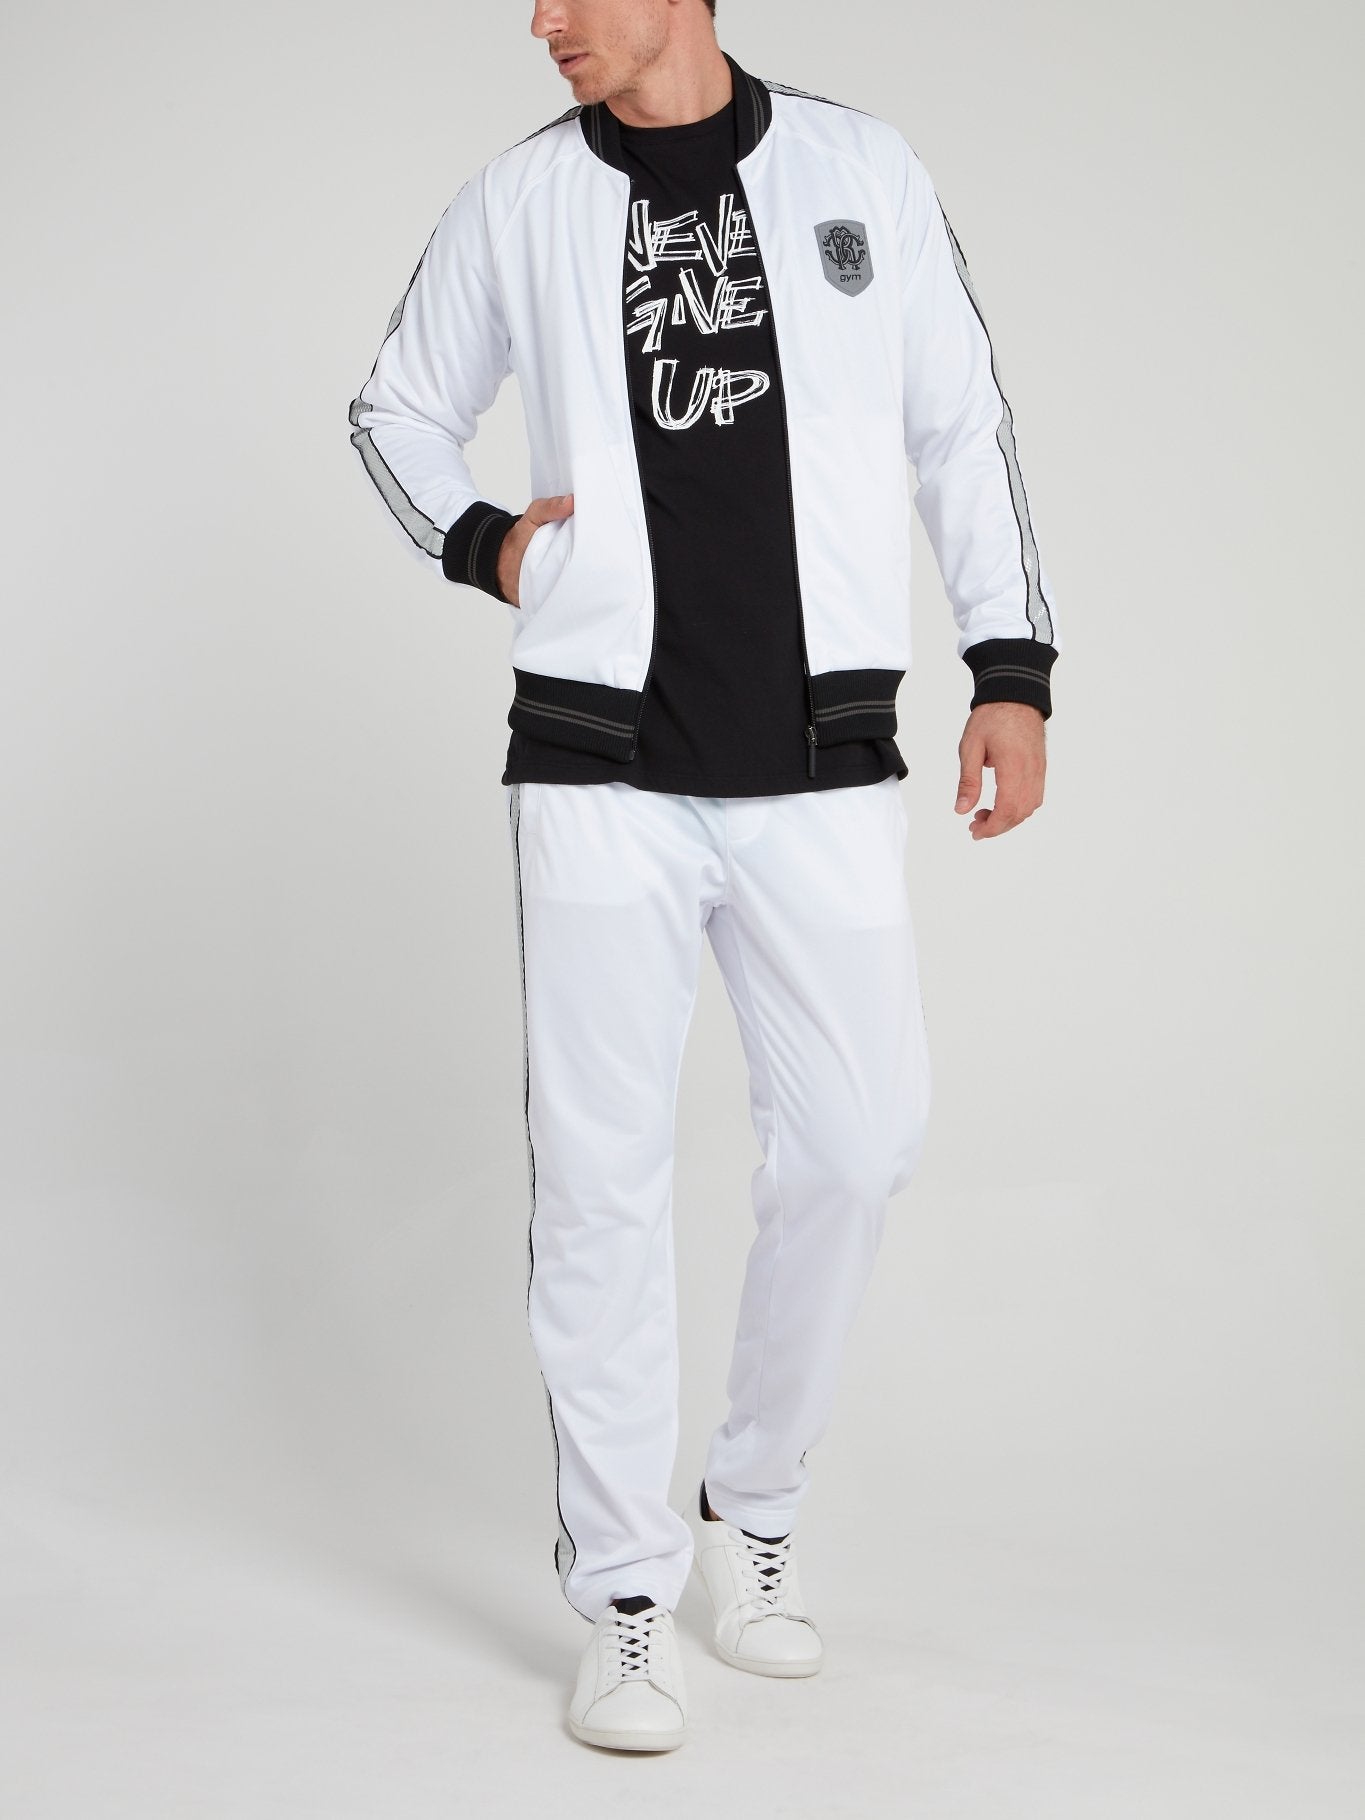 White With Side Line Detail Track Pants